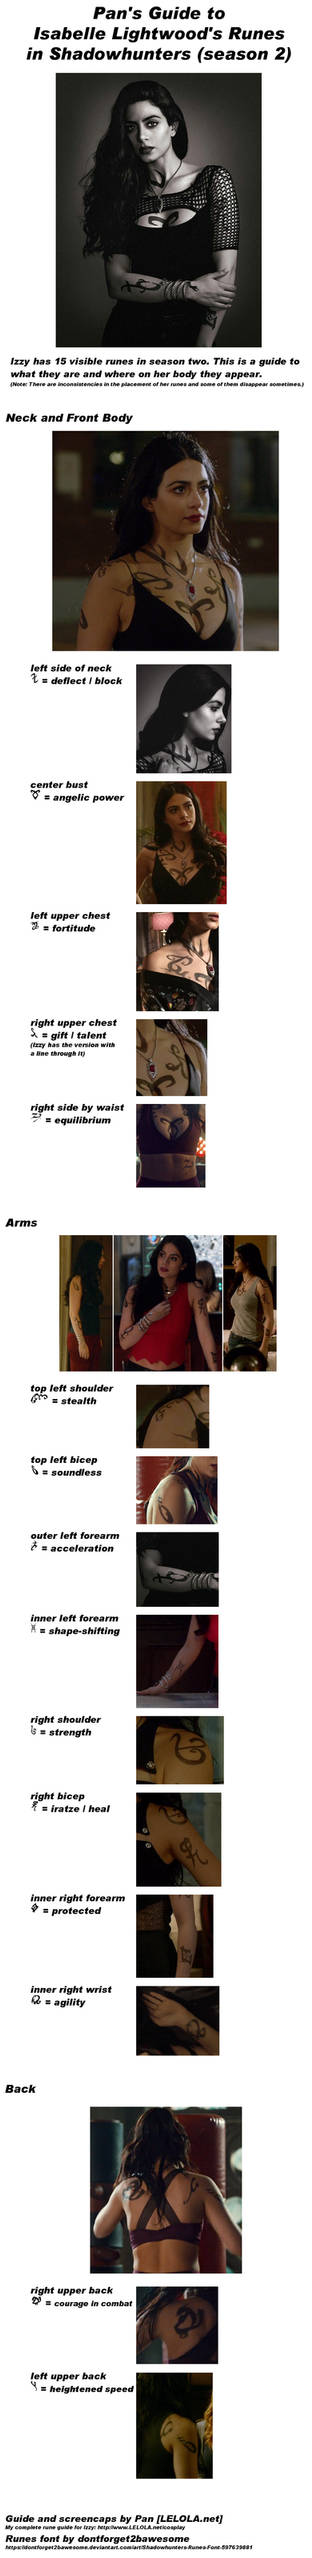 Isabelle Lightwood Shadowhunters Runes Guide